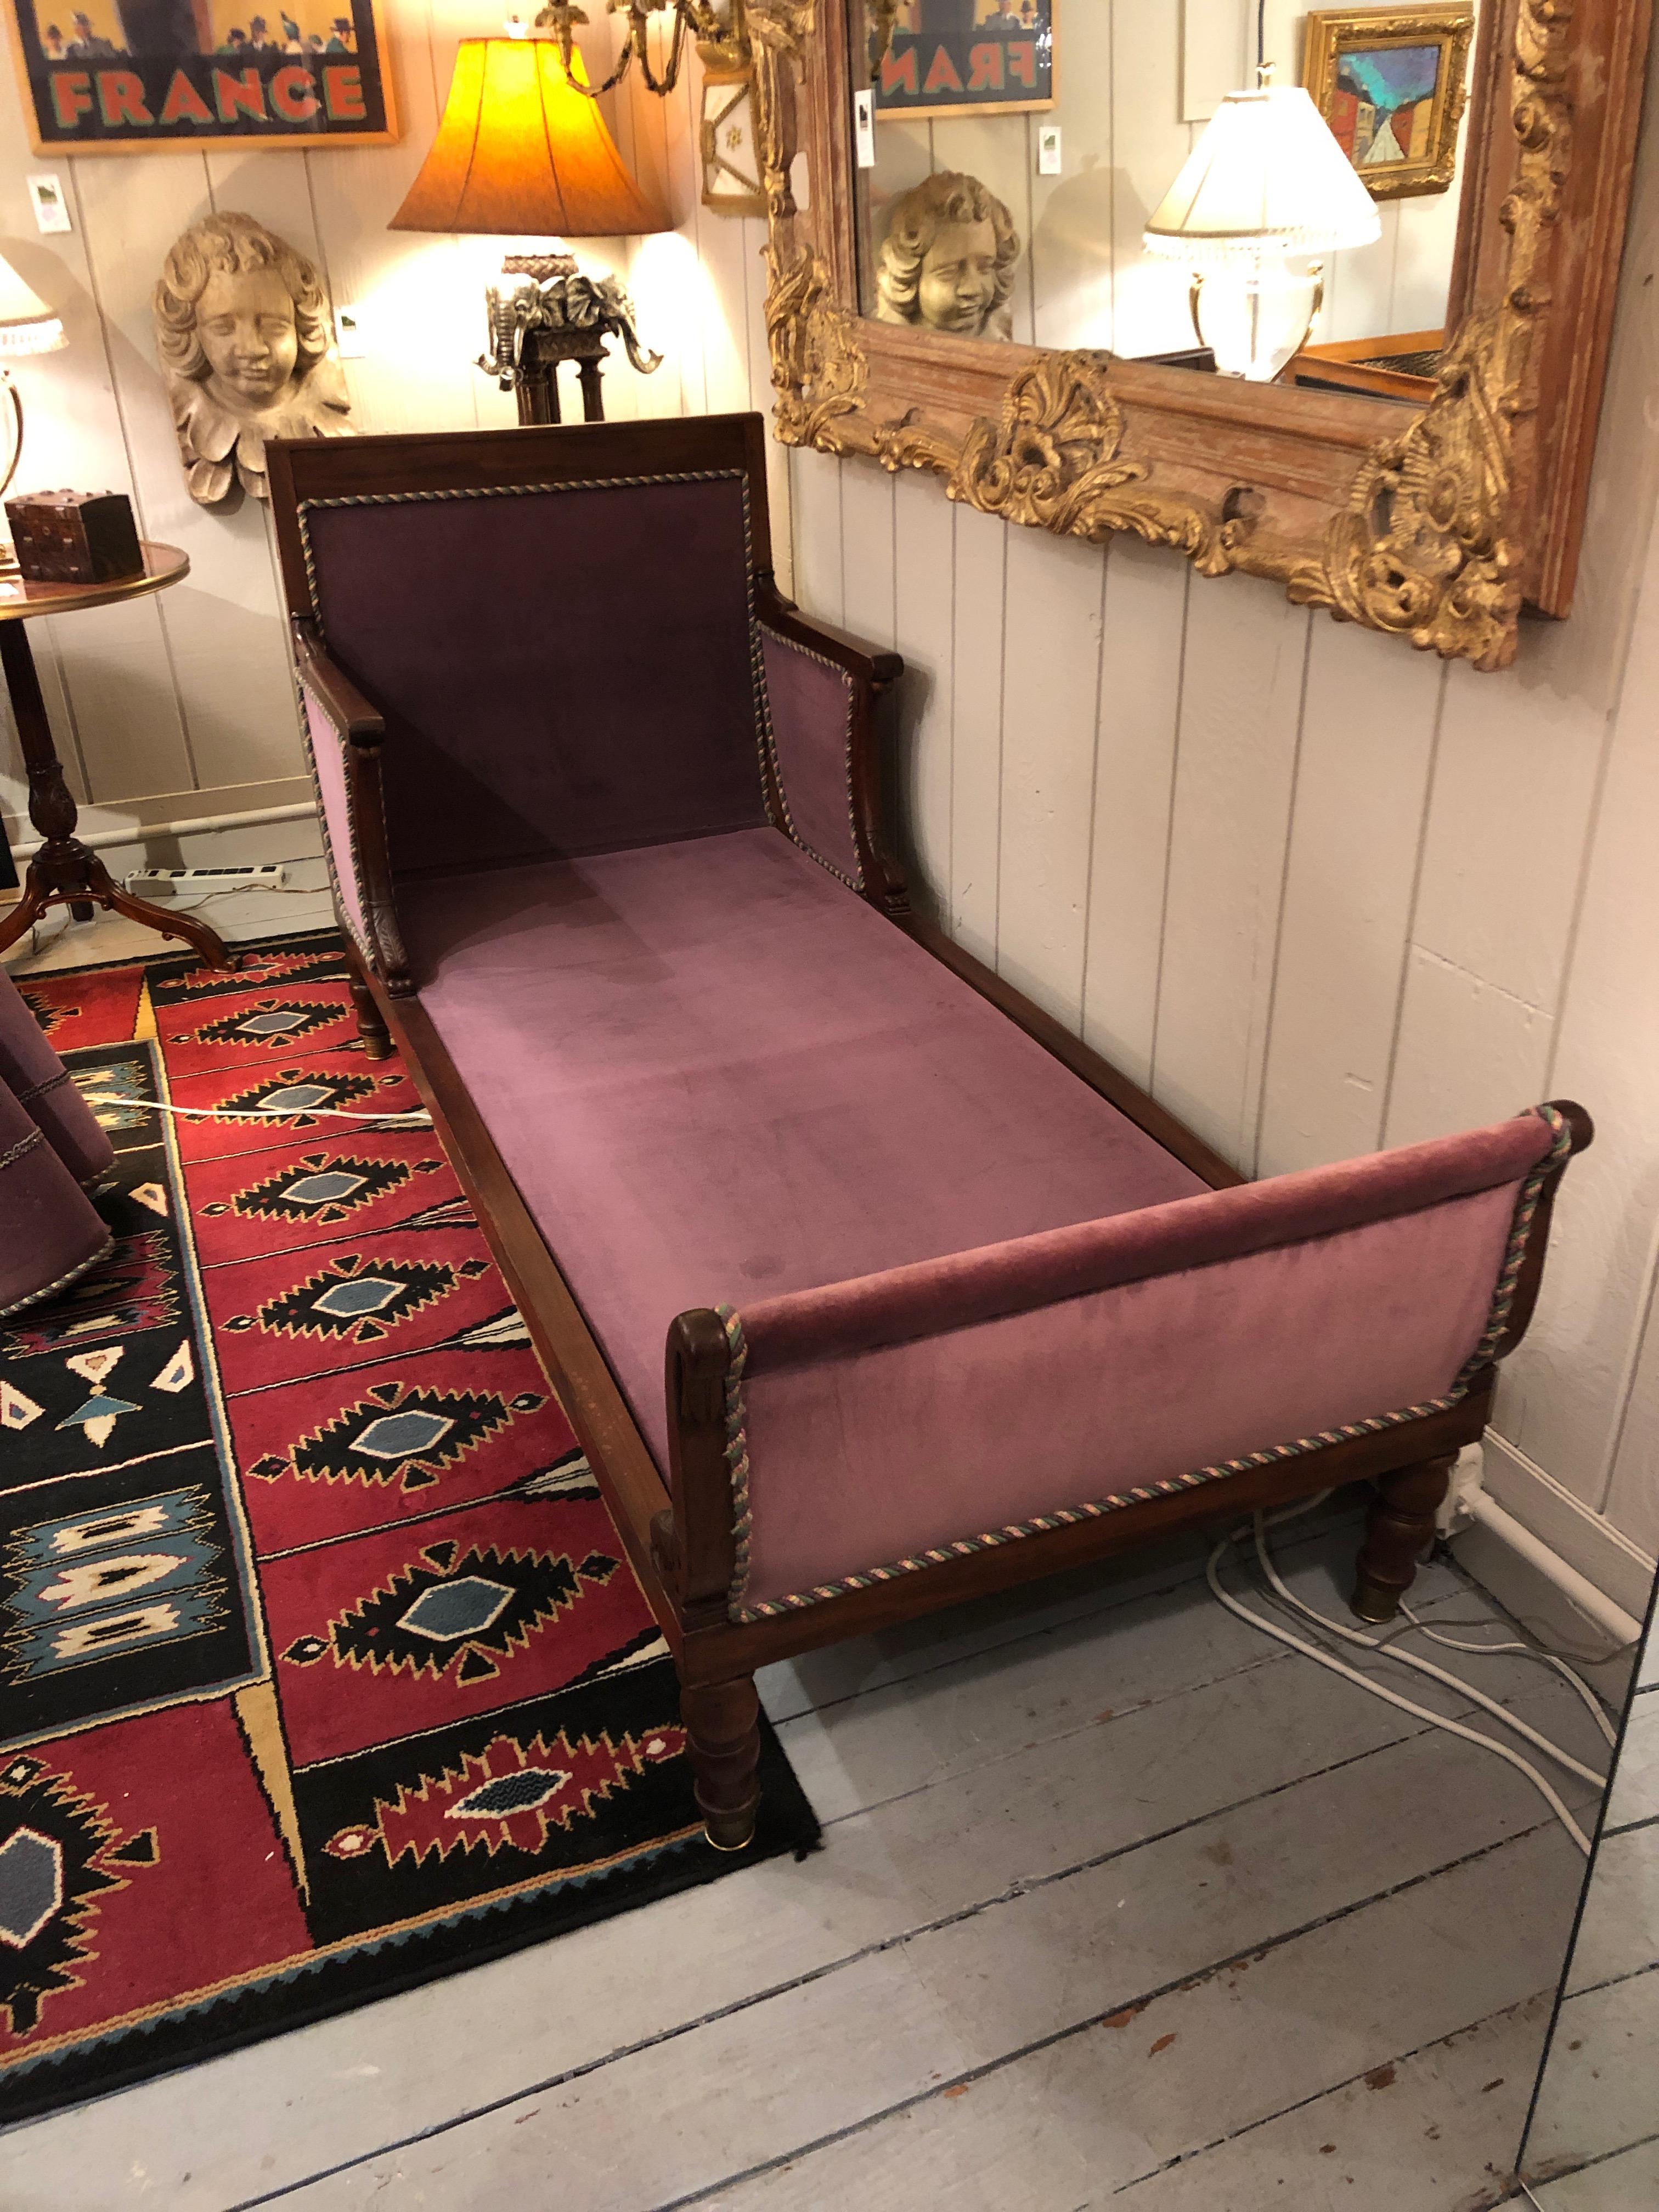 Romantic Parisian 19th century mahogany neoclassical daybed having dolphin decoration, turned feet, extension shelf on one end and aubergine velvet upholstery with silk rope detailing.
Measures: Bed cushion is 72 inches or 6 ft long x 30 D
Arm